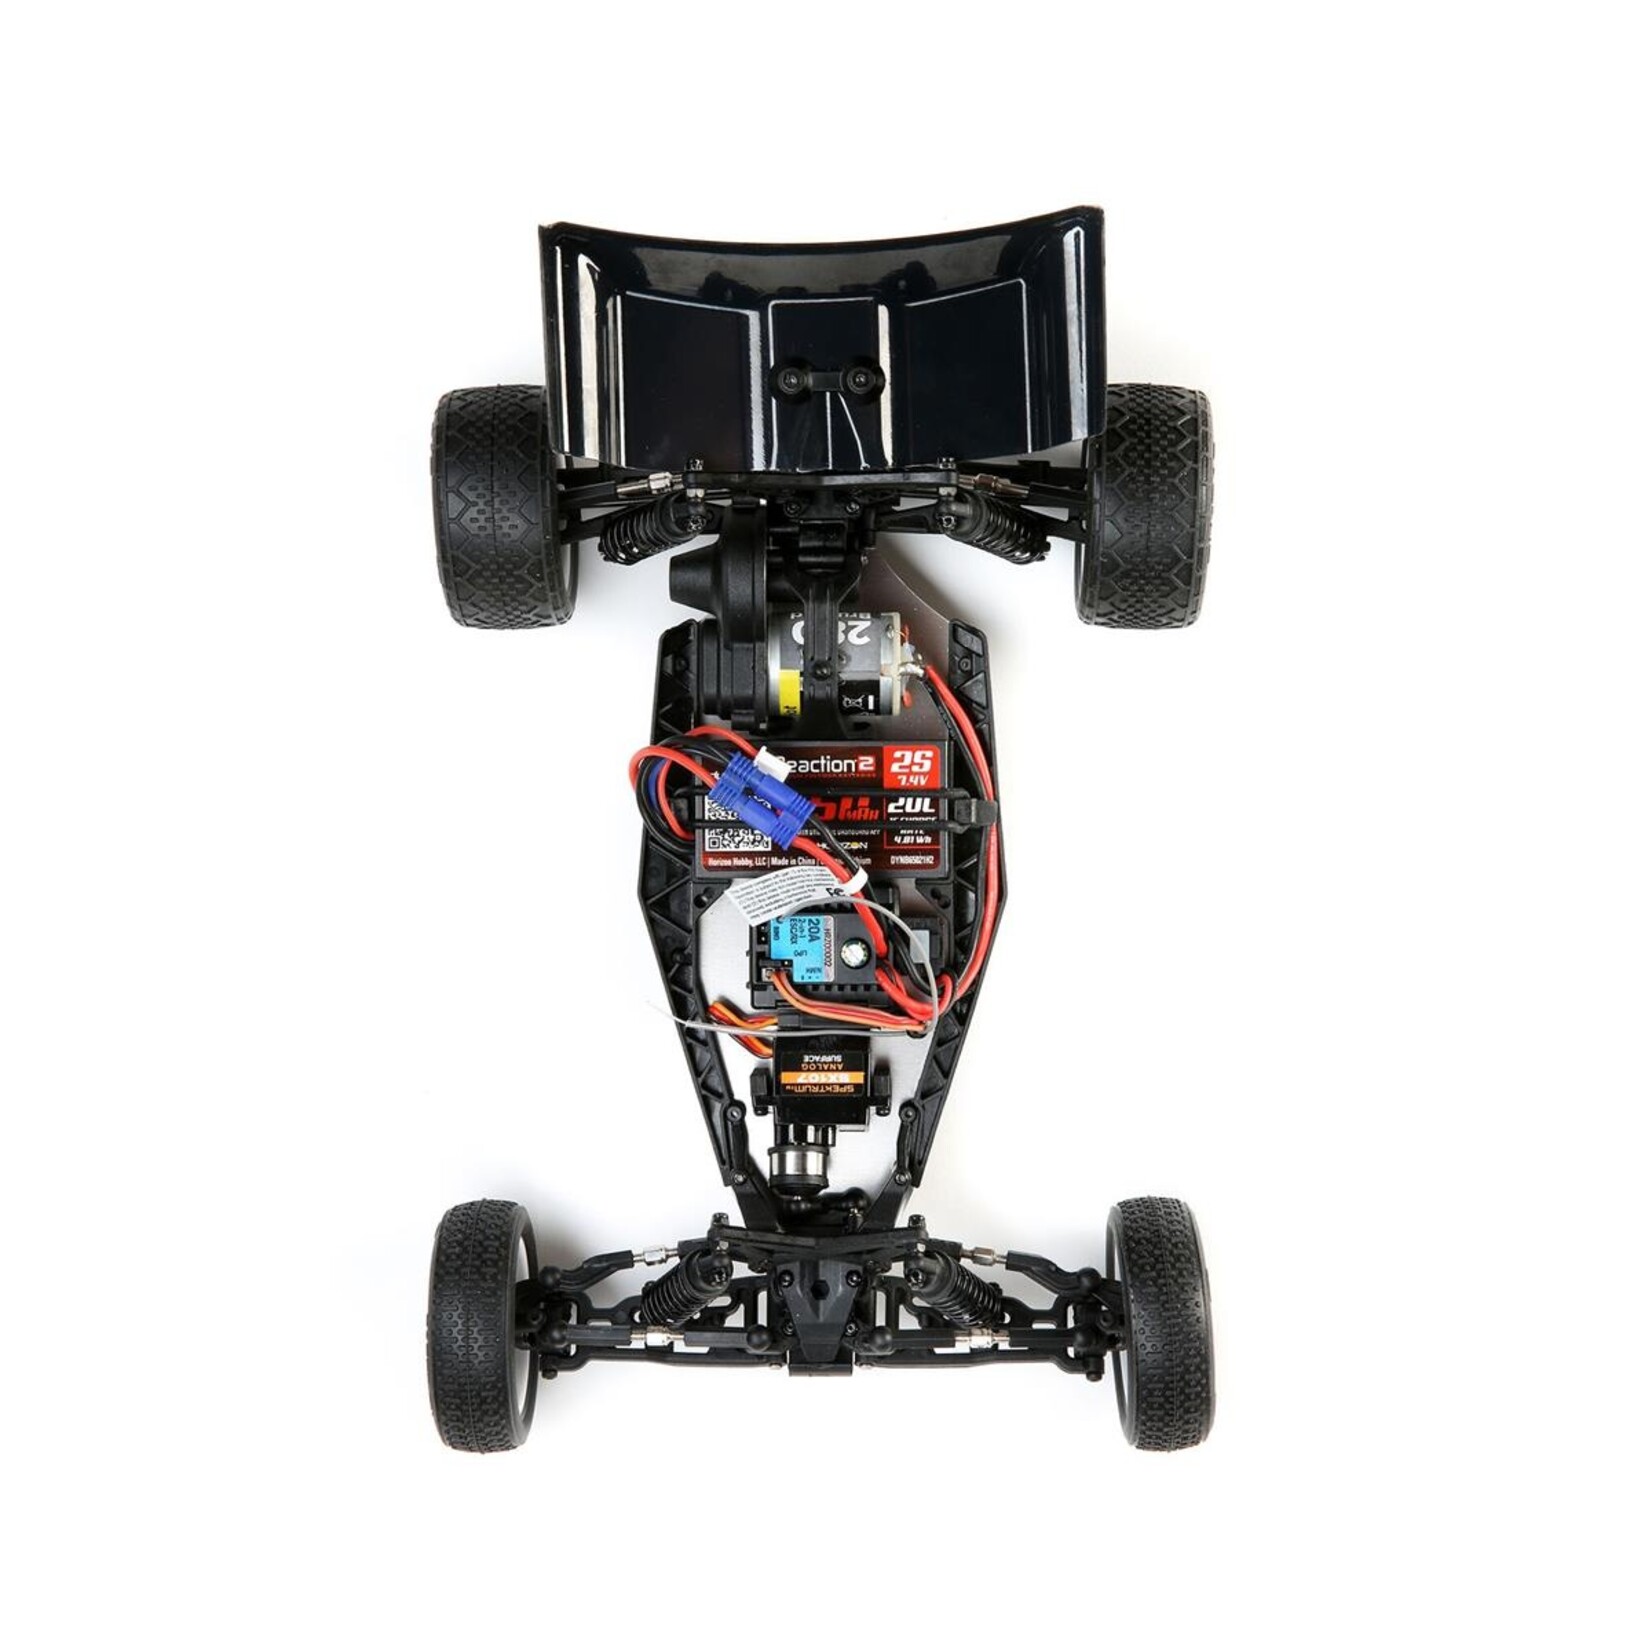 Losi Losi Mini-B 1/16 RTR 2WD Buggy (Black) w/2.4GHz Radio, Battery & Charger #LOS01016T2